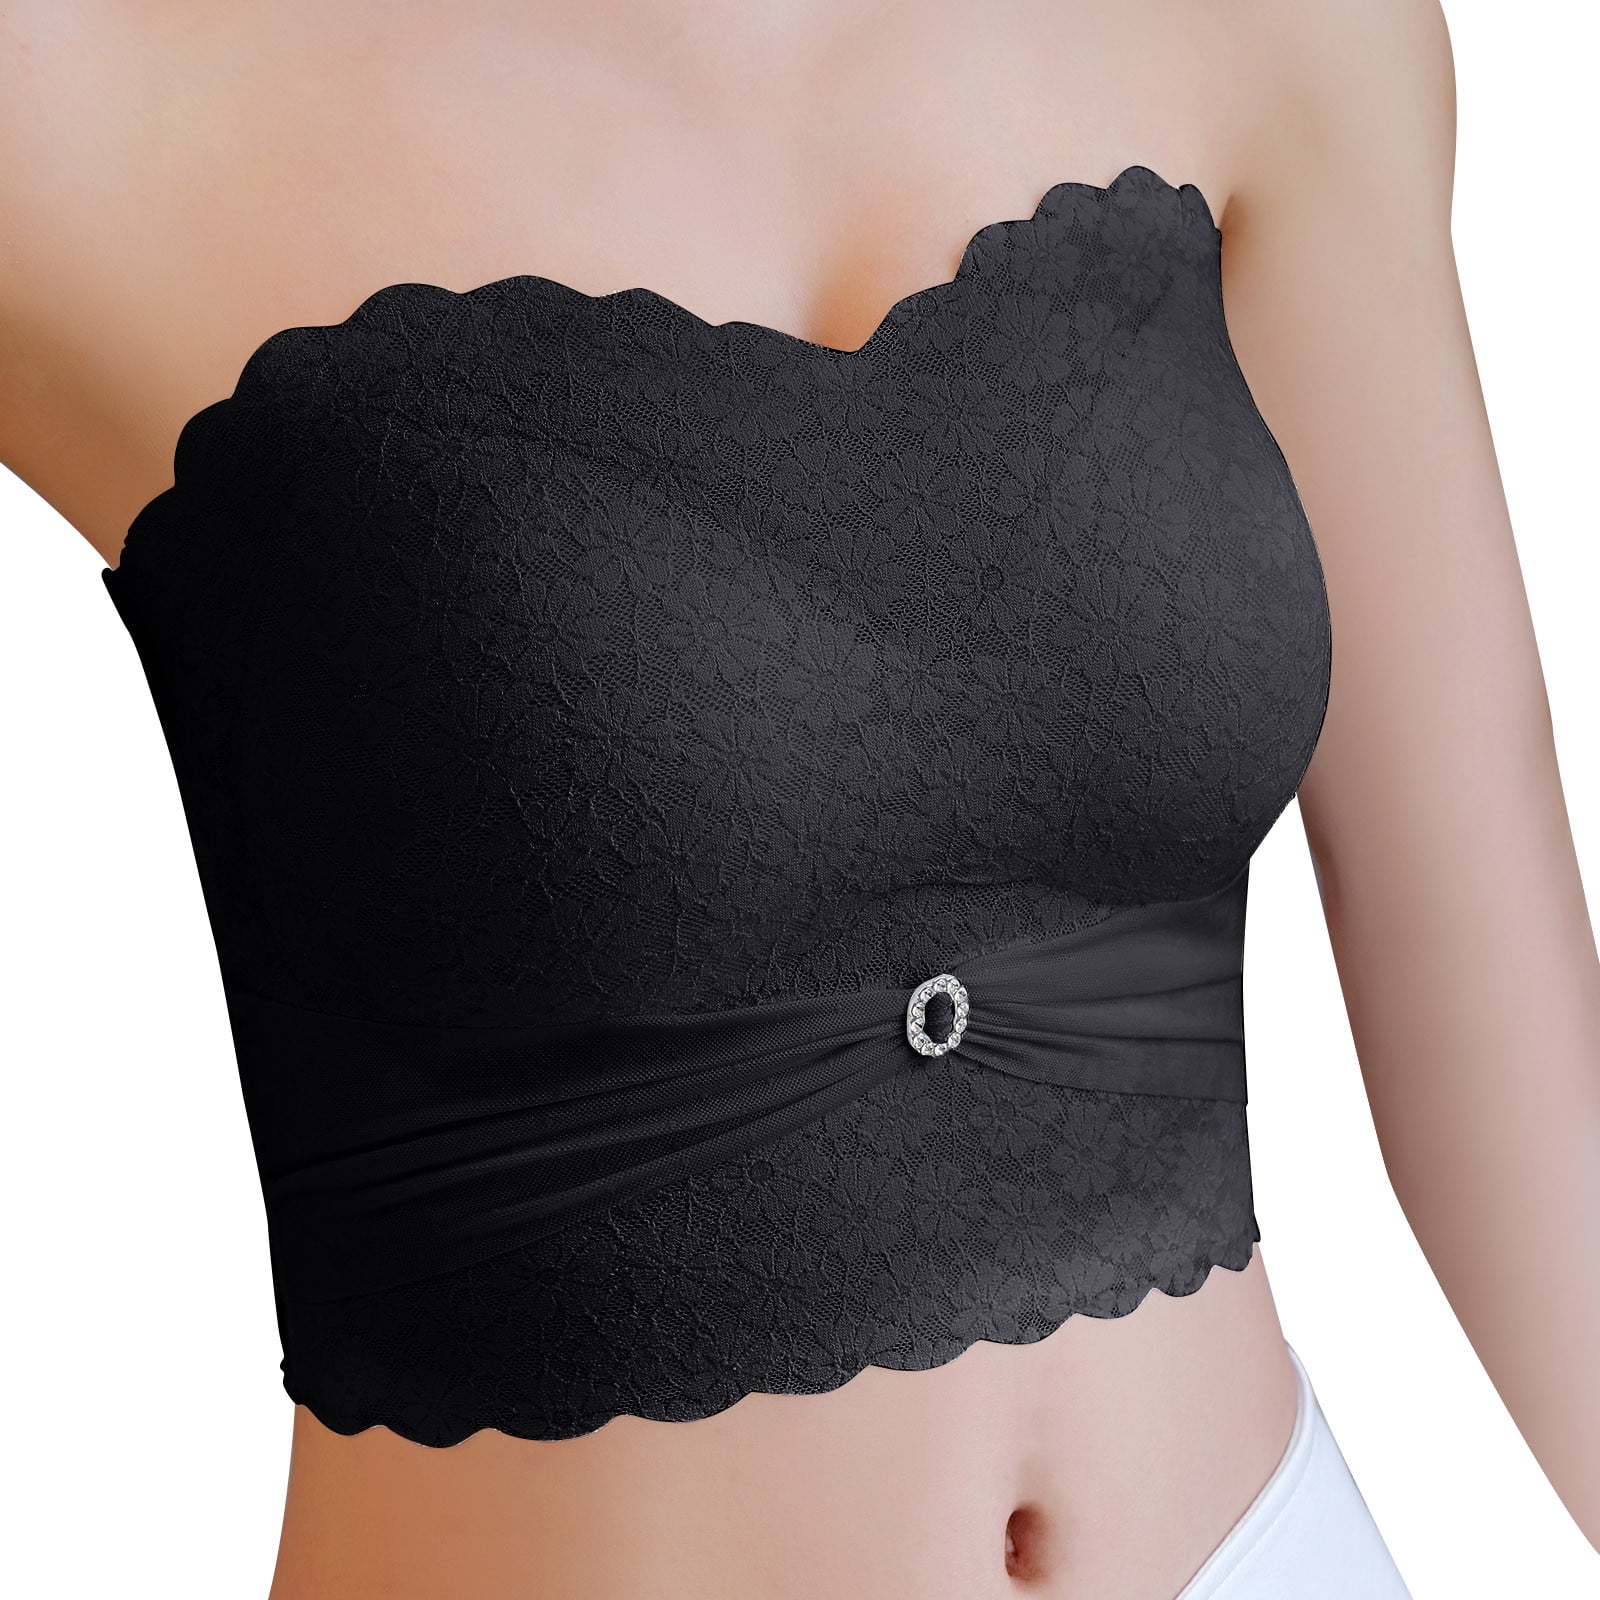 EHQJNJ Sports Bras for Women High Support Women Lace Strapless Shoulder  Straps Two Wear Gathering underwear Sports Bra Cover Cup Large Size Vest  Bras